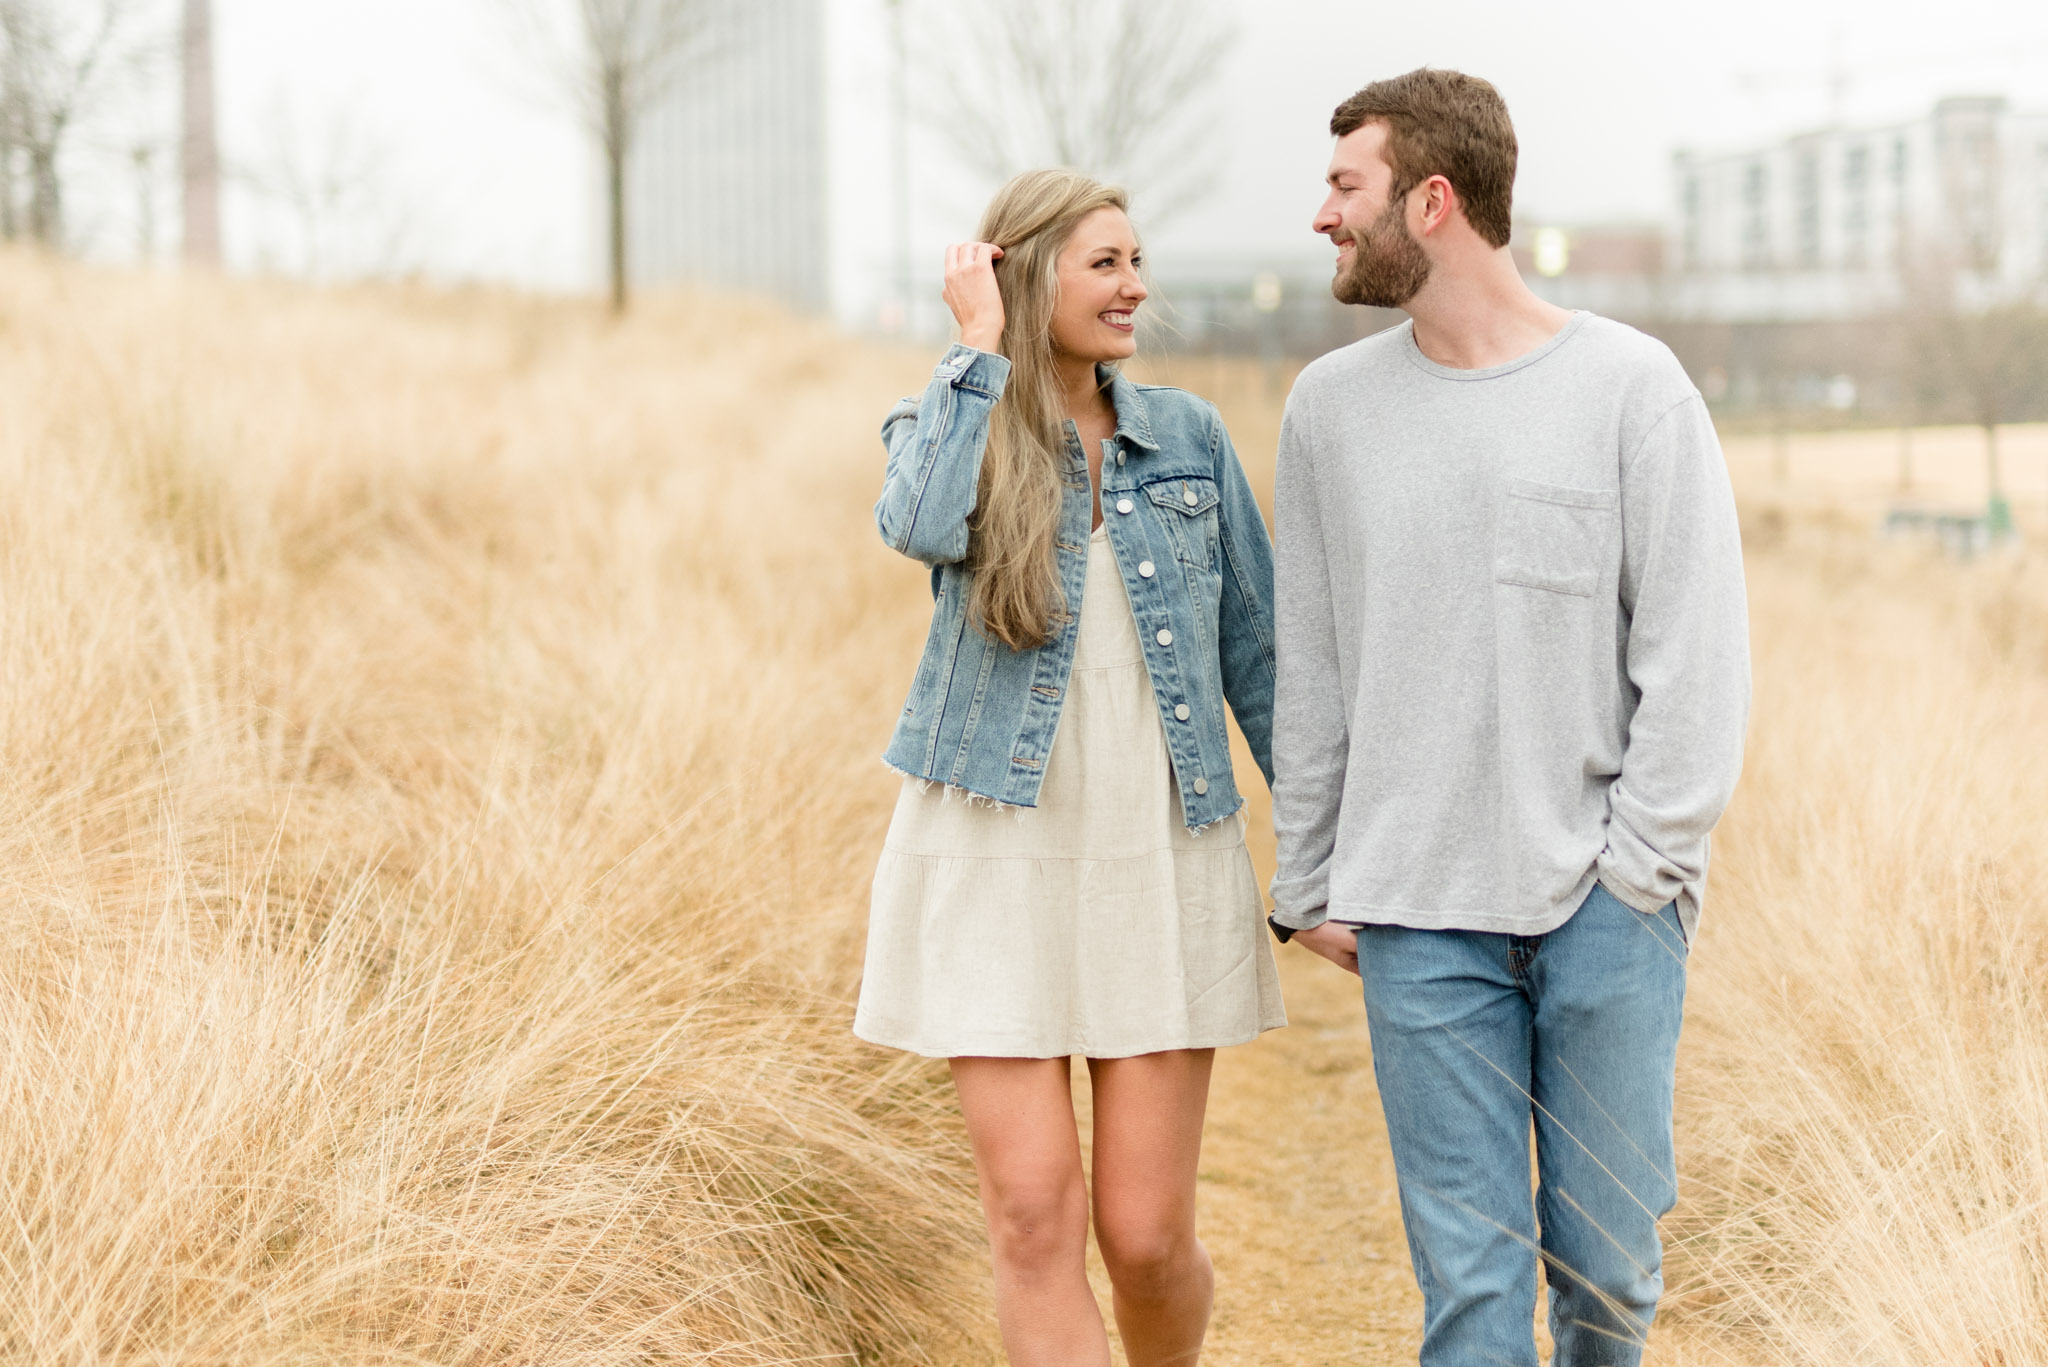 Couple walks through field and smiles.